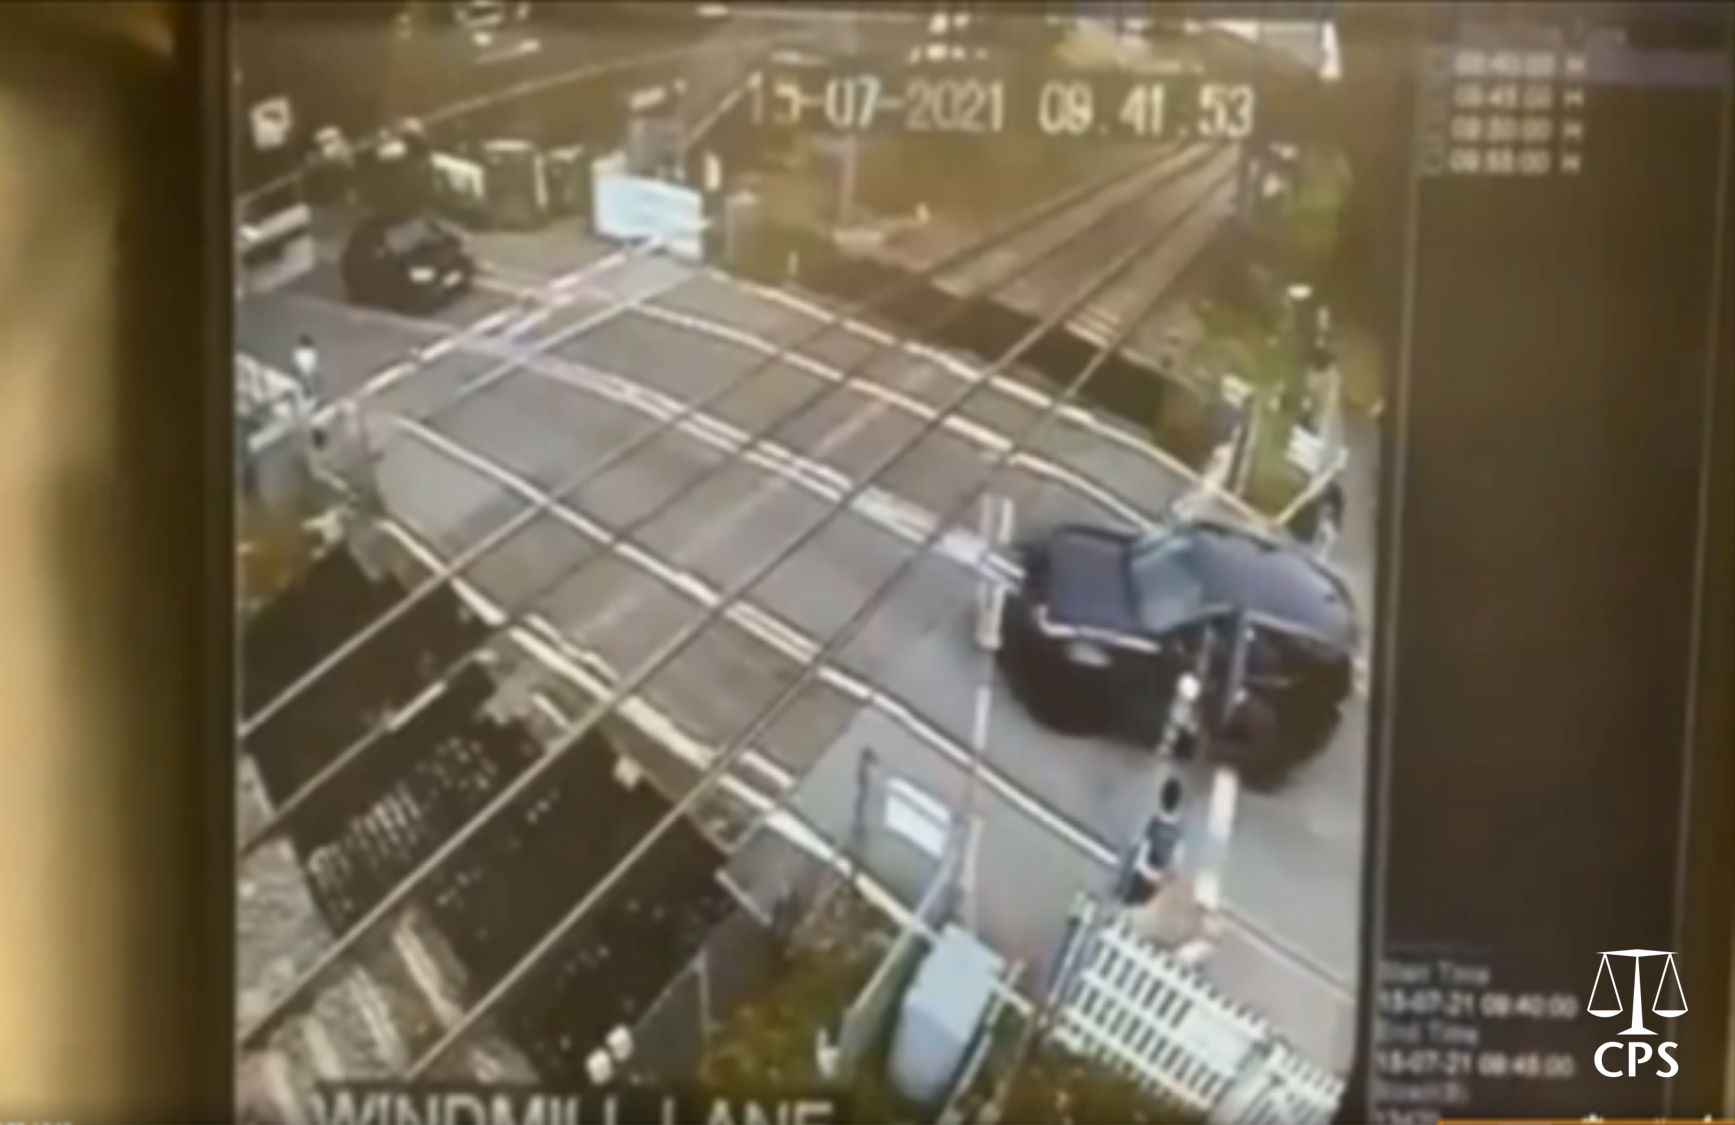 Land Rover drives through level crossing barriers